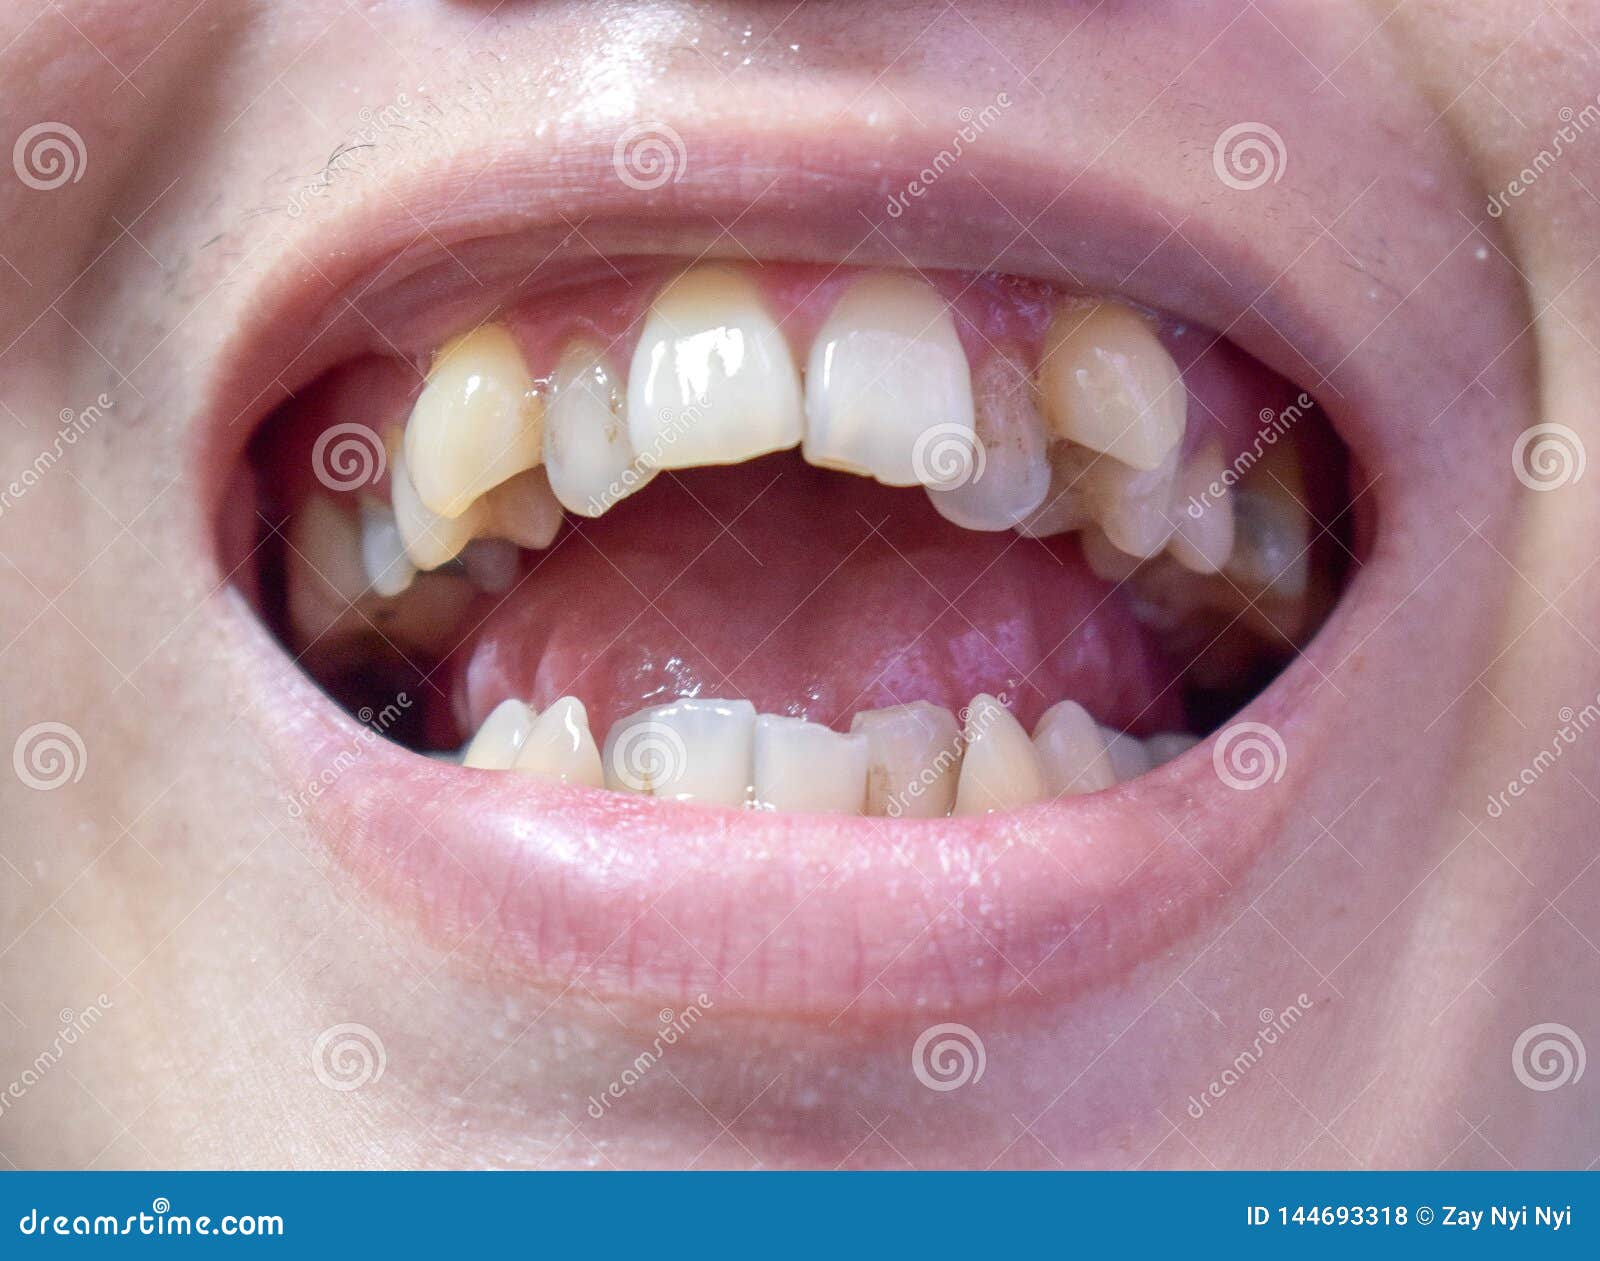 malocclusion, overcrowding of both upper and lower teeth